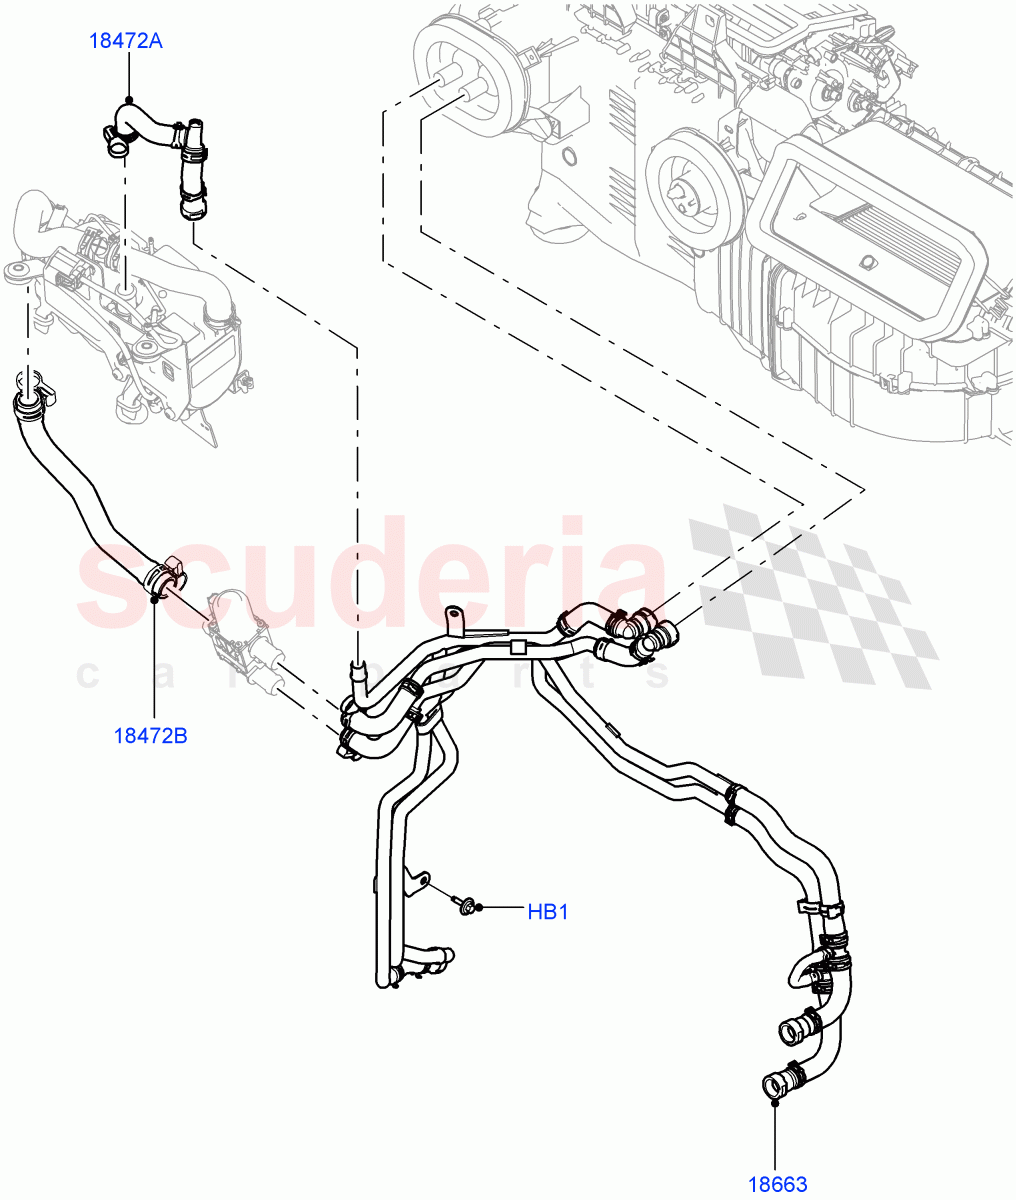 Heater Hoses(Solihull Plant Build)(2.0L I4 DSL MID DOHC AJ200,With Fuel Fired Heater,With Air Conditioning - Front/Rear,Park Heating With Remote Control,2.0L I4 DSL HIGH DOHC AJ200)((V)FROMHA000001,(V)TOHA999999) of Land Rover Land Rover Discovery 5 (2017+) [3.0 I6 Turbo Petrol AJ20P6]